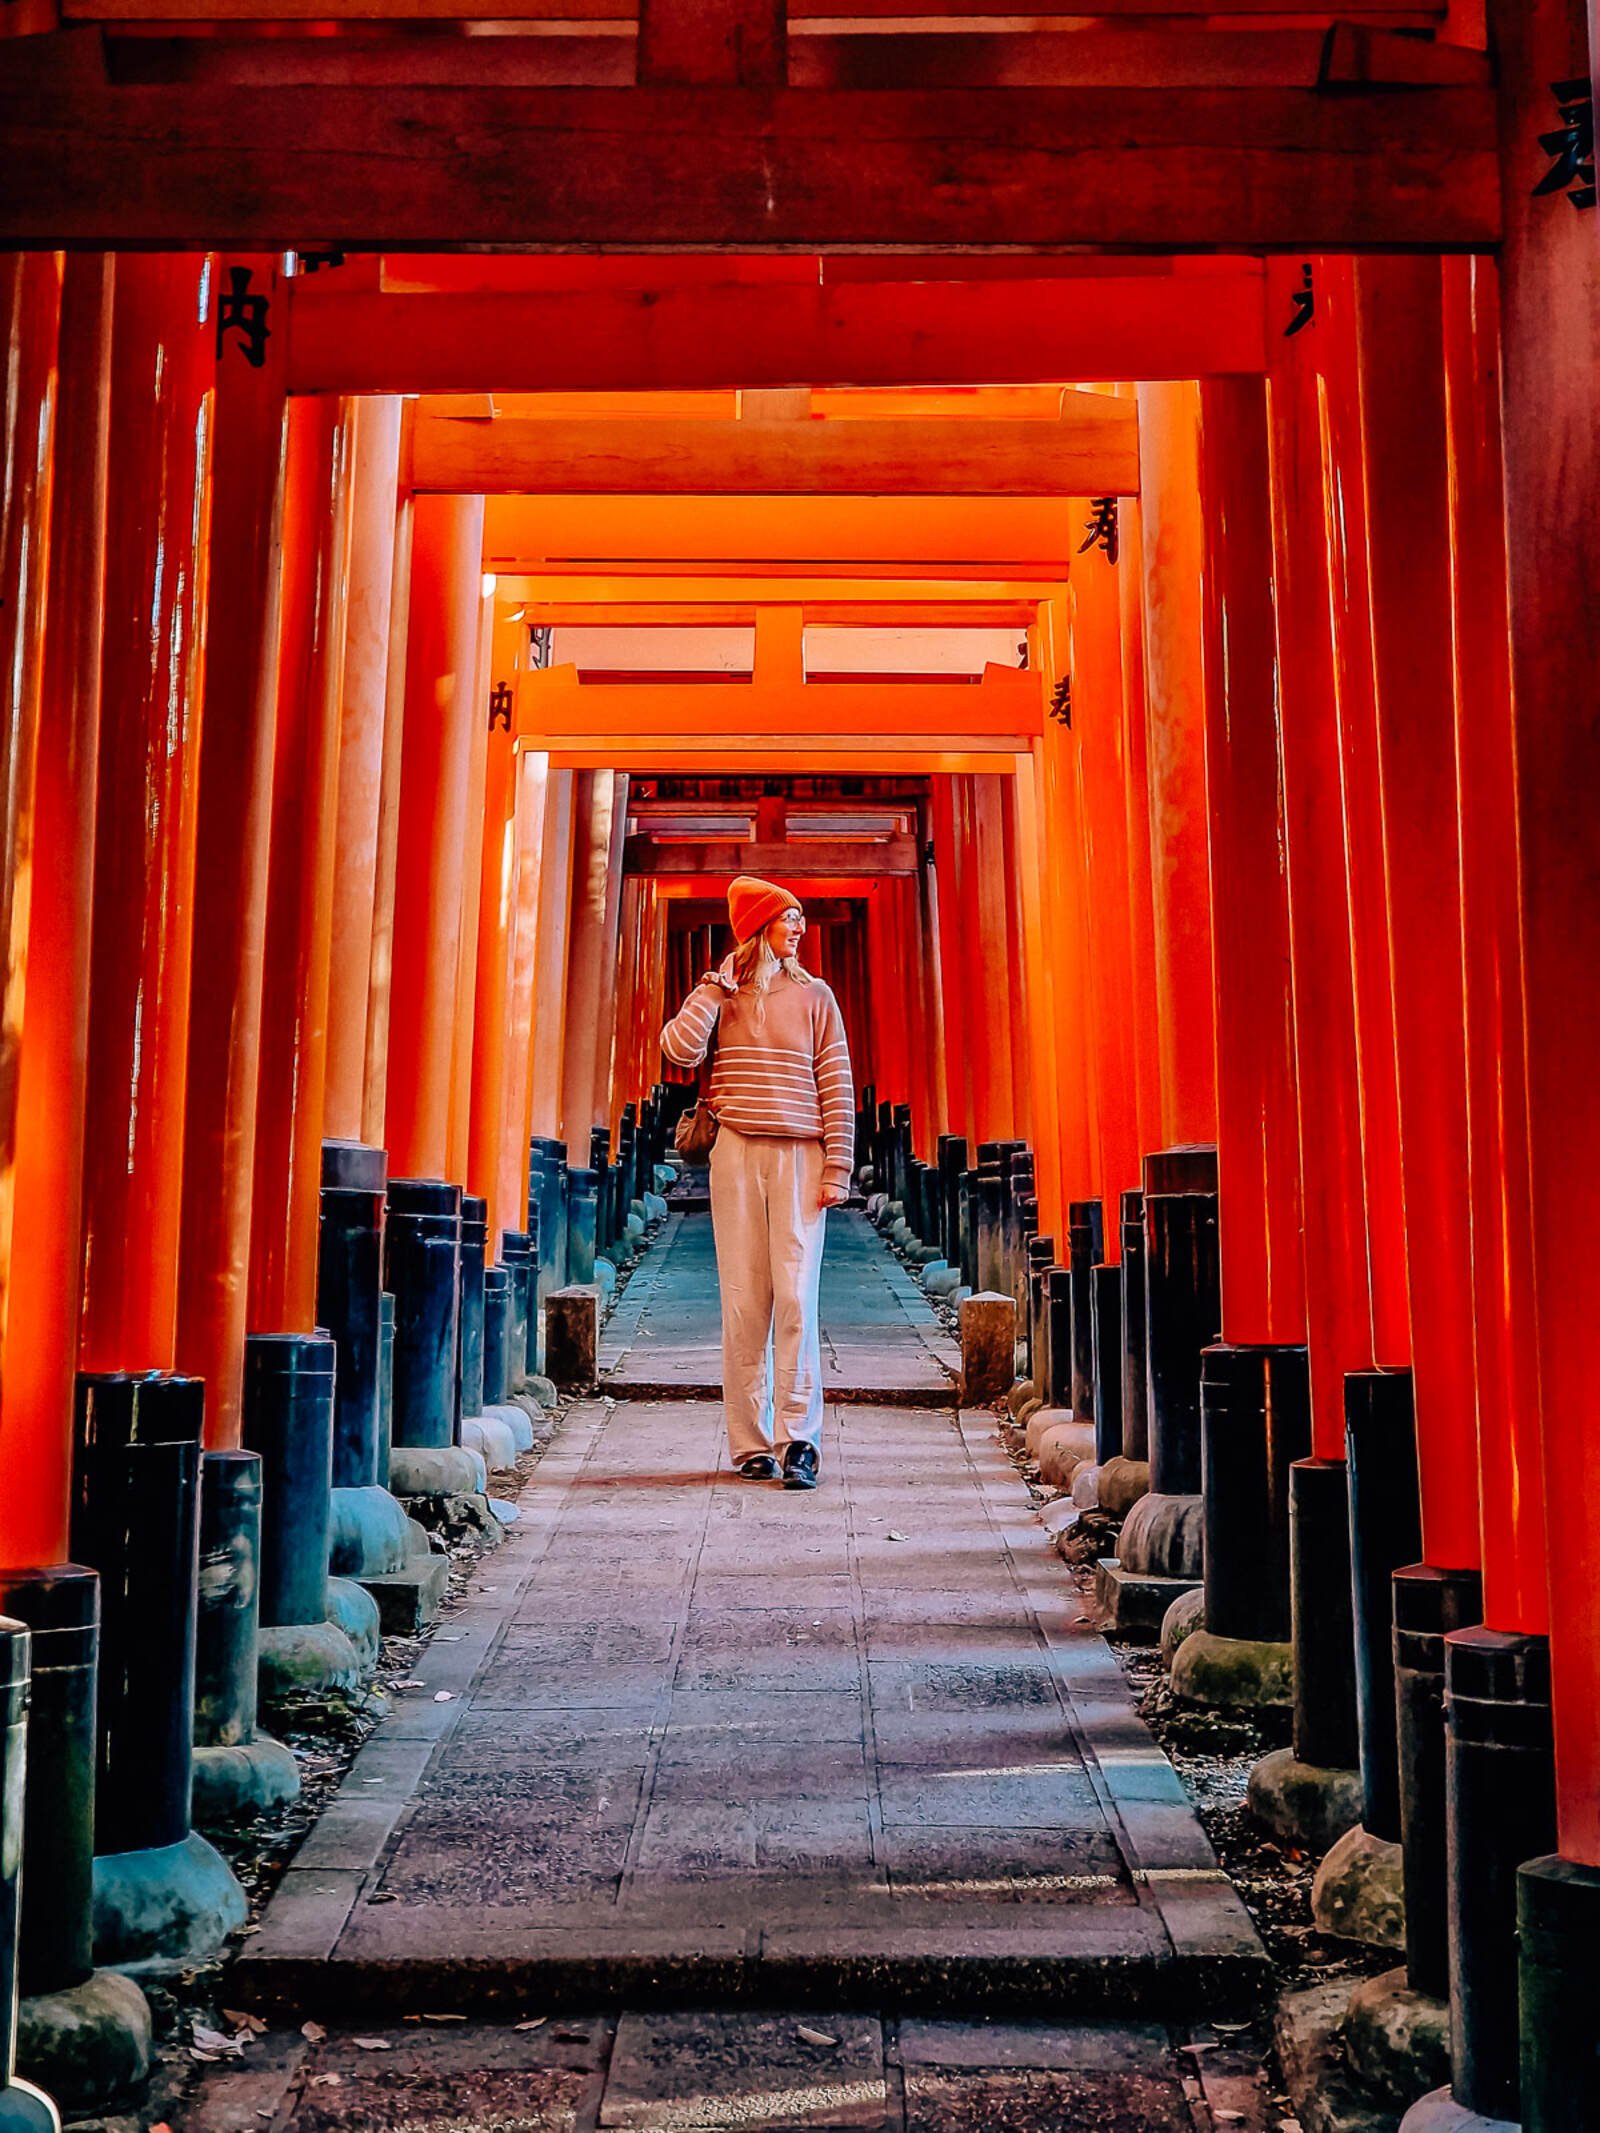 Helena walking down a paved path lined with orange torii gates in Kyoto Japan